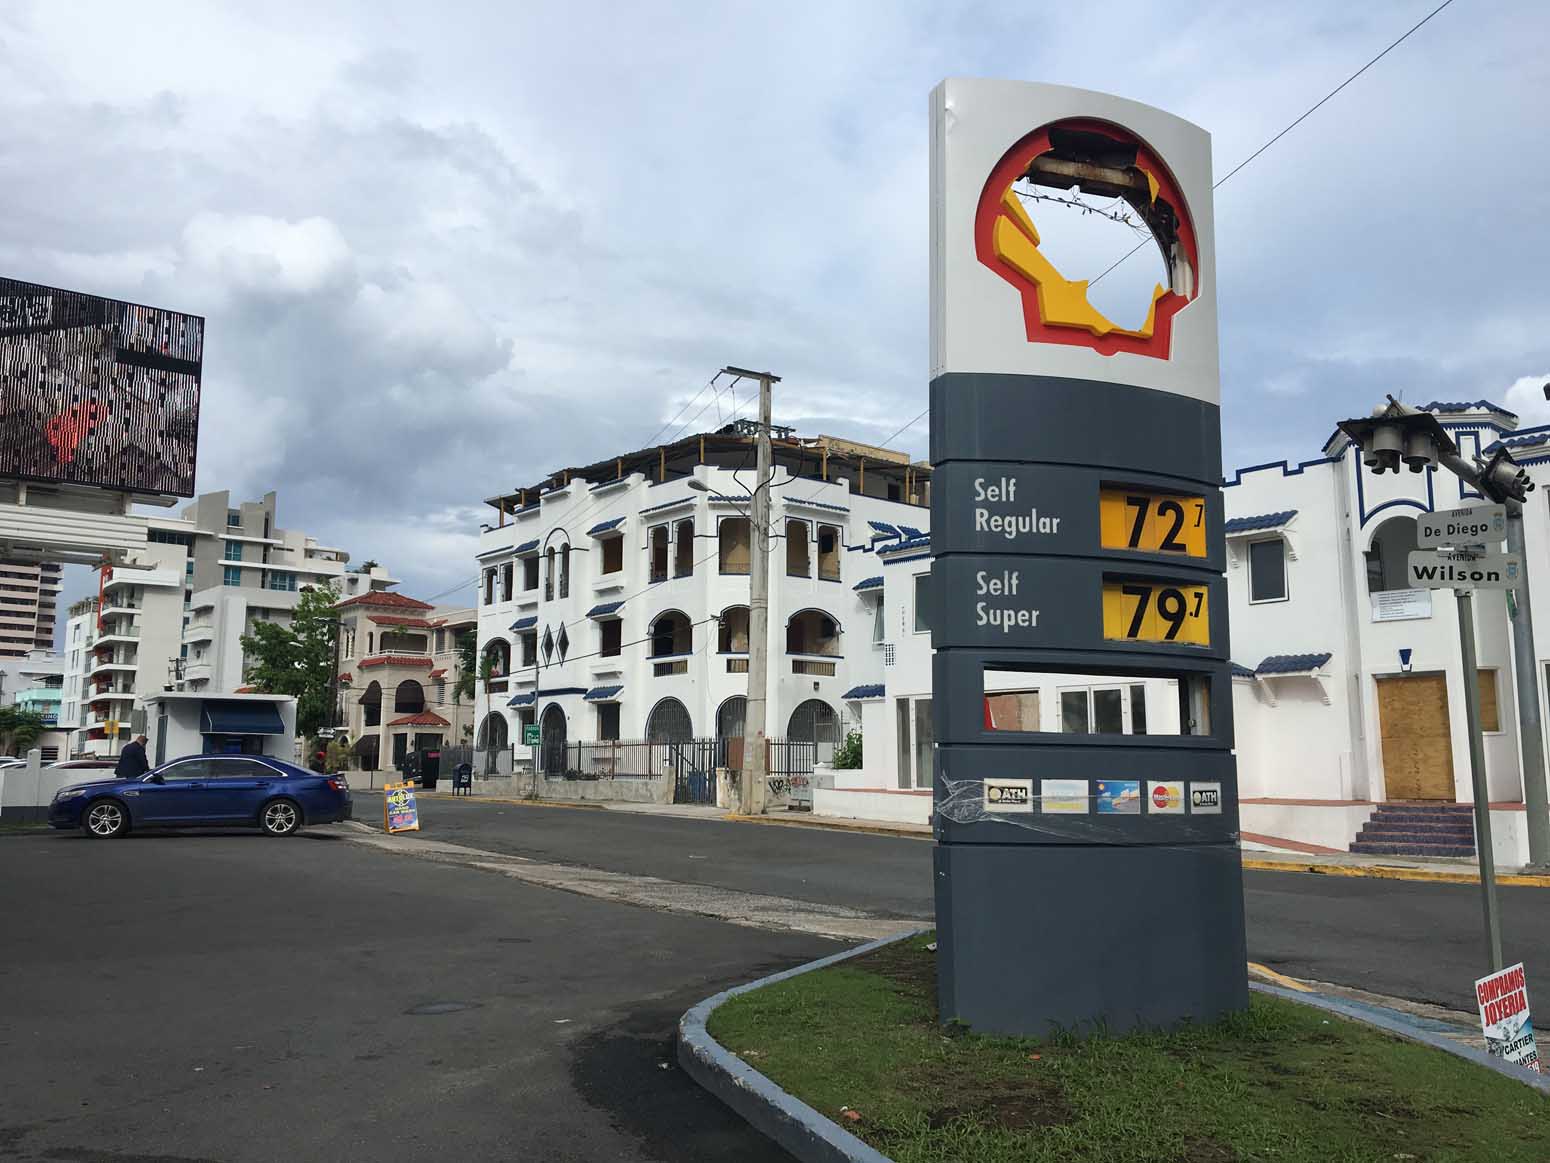 This Shell petrol station sign took a battering